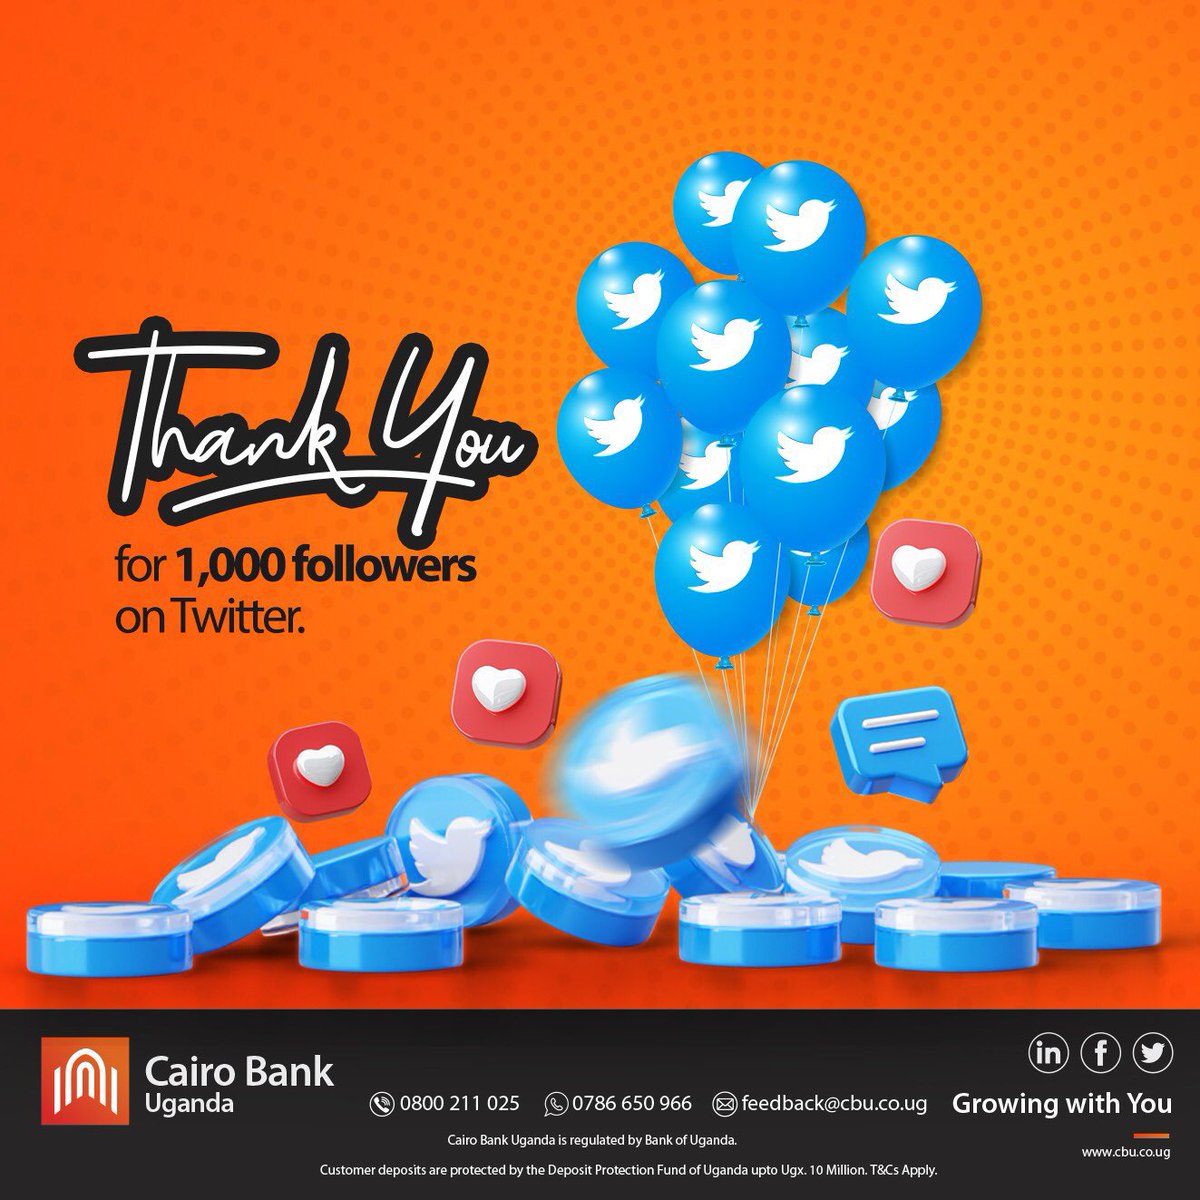 To our always growing community on Twitter, we are here to say thank you for 1,000 followers so far!

🎯 Cairo Bank Uganda - Growing with you!

#CairoBankUganda